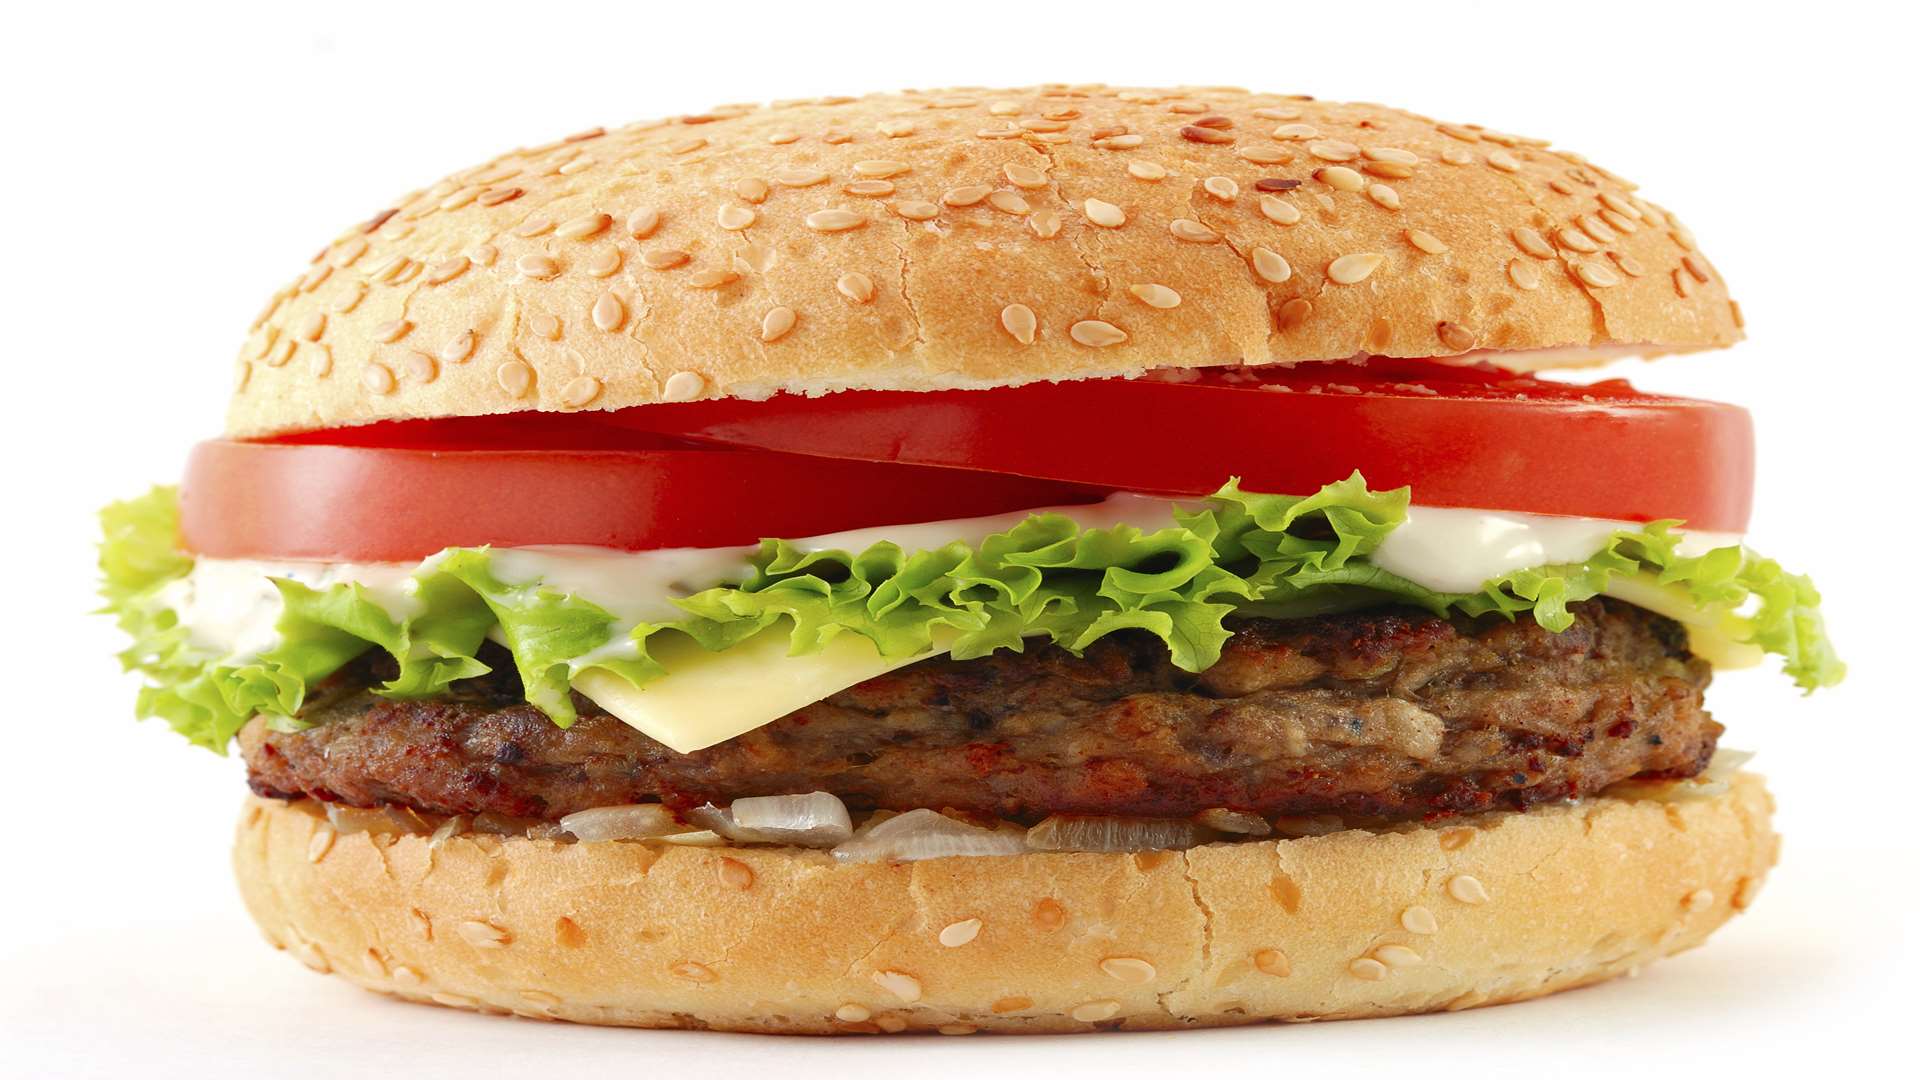 Sainsbury's is recalling a batch of its Taste the Difference beef burgers amid E. coli concerns. Picture: Thinkstock